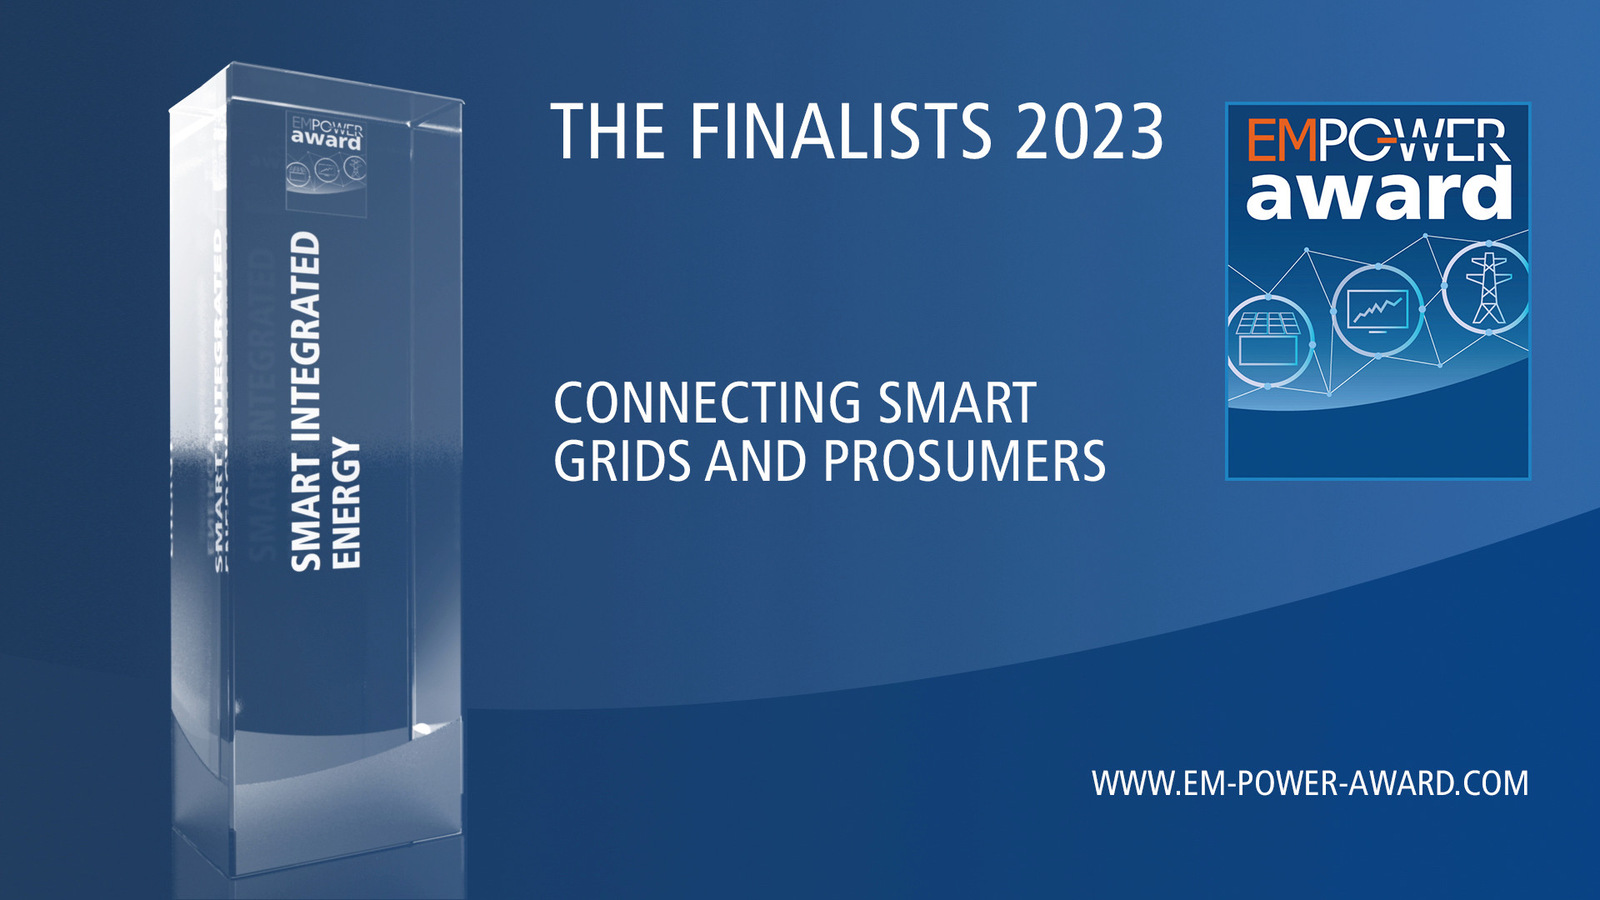 These are the finalists for the EM-Power Award 2023